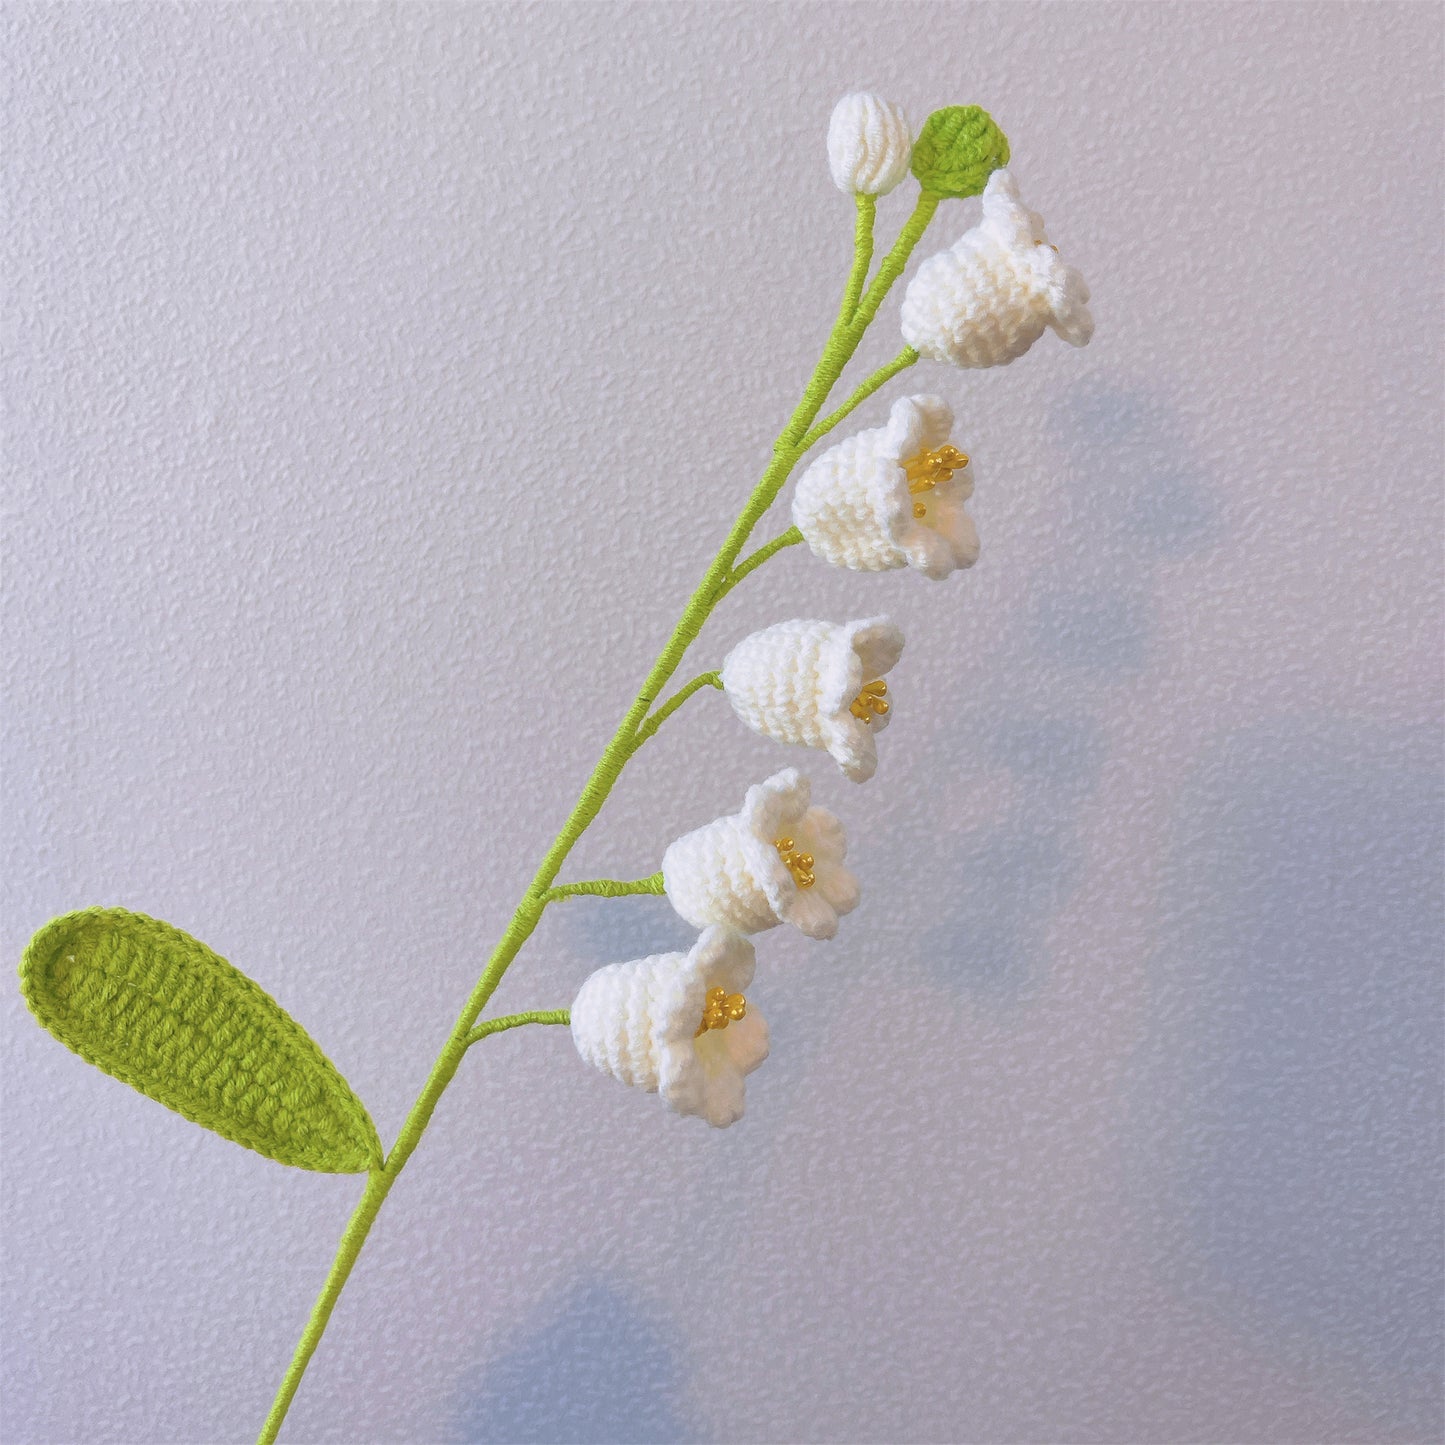 May Birth Month Lily of the Valley Bouquet - Hand-Crocheted Single Stem Birthday Flower